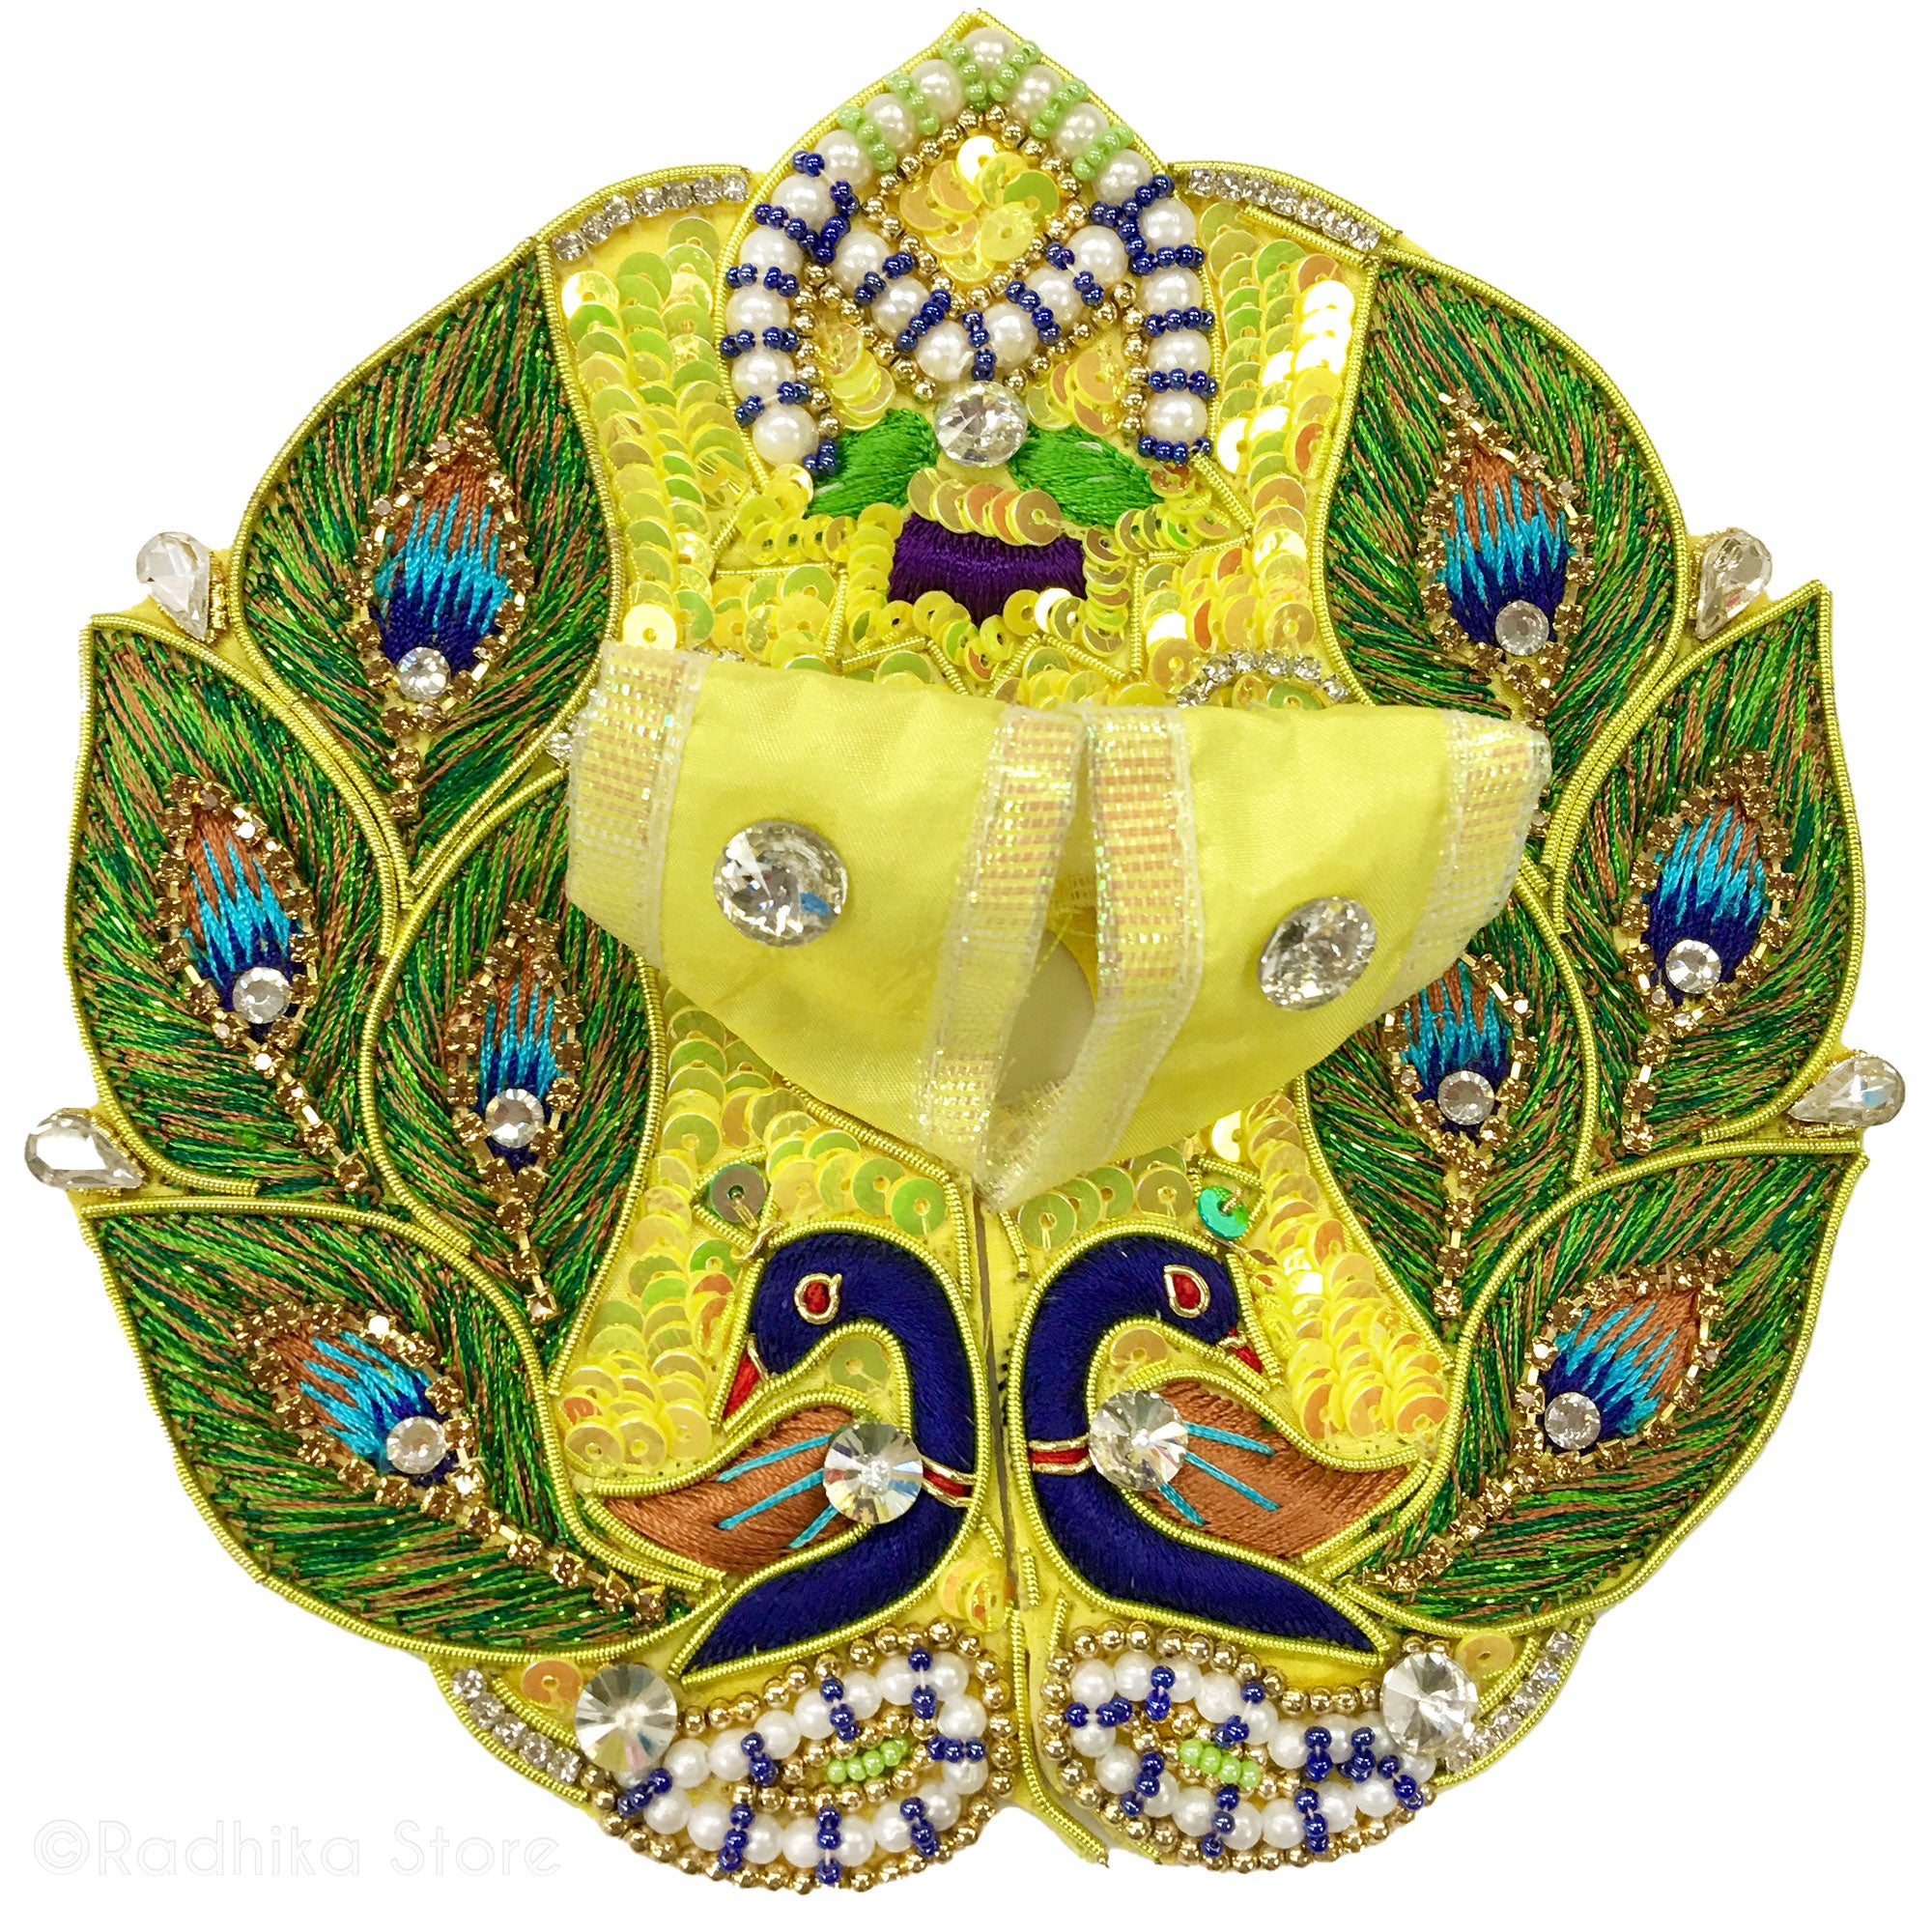 Guardian Peacocks - Yellow Satin - Size 1" up to 5" Inch Laddu Gopal